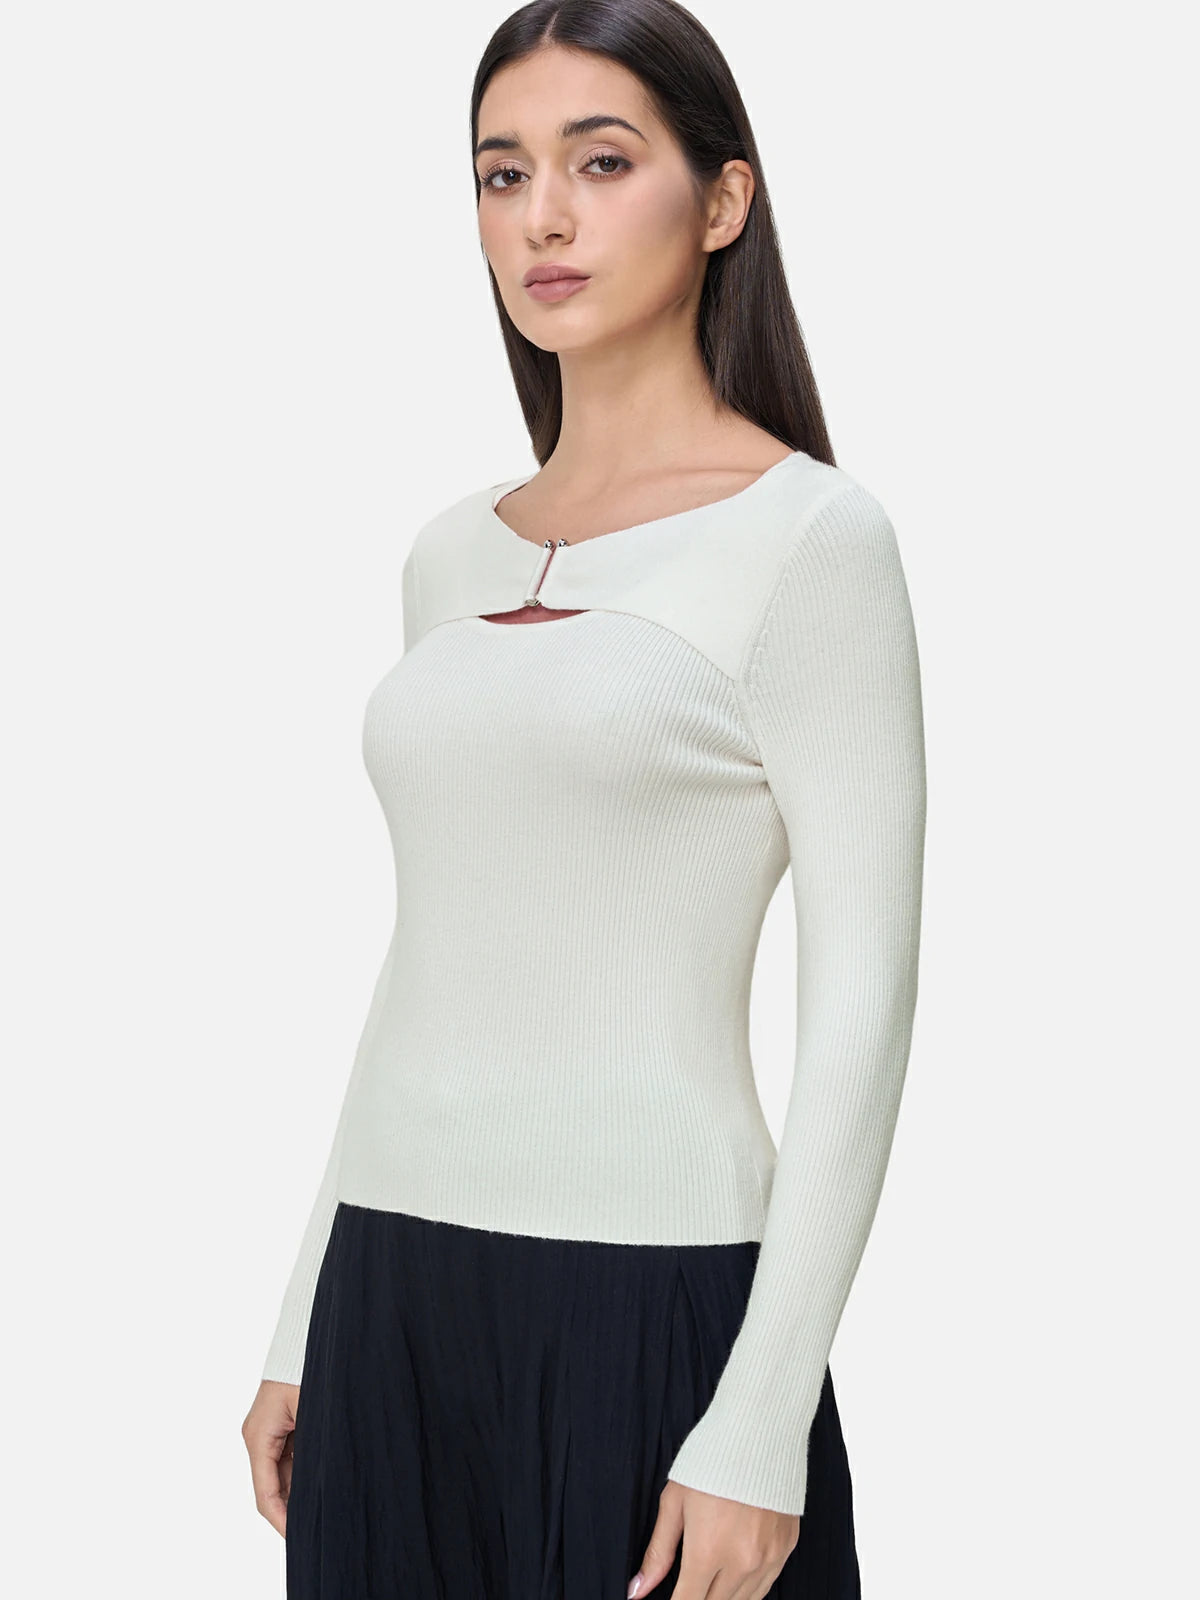 Elevate your wardrobe with this chic white knit sweater, showcasing avant-garde hollow-out detailing for a modern and stylish look.